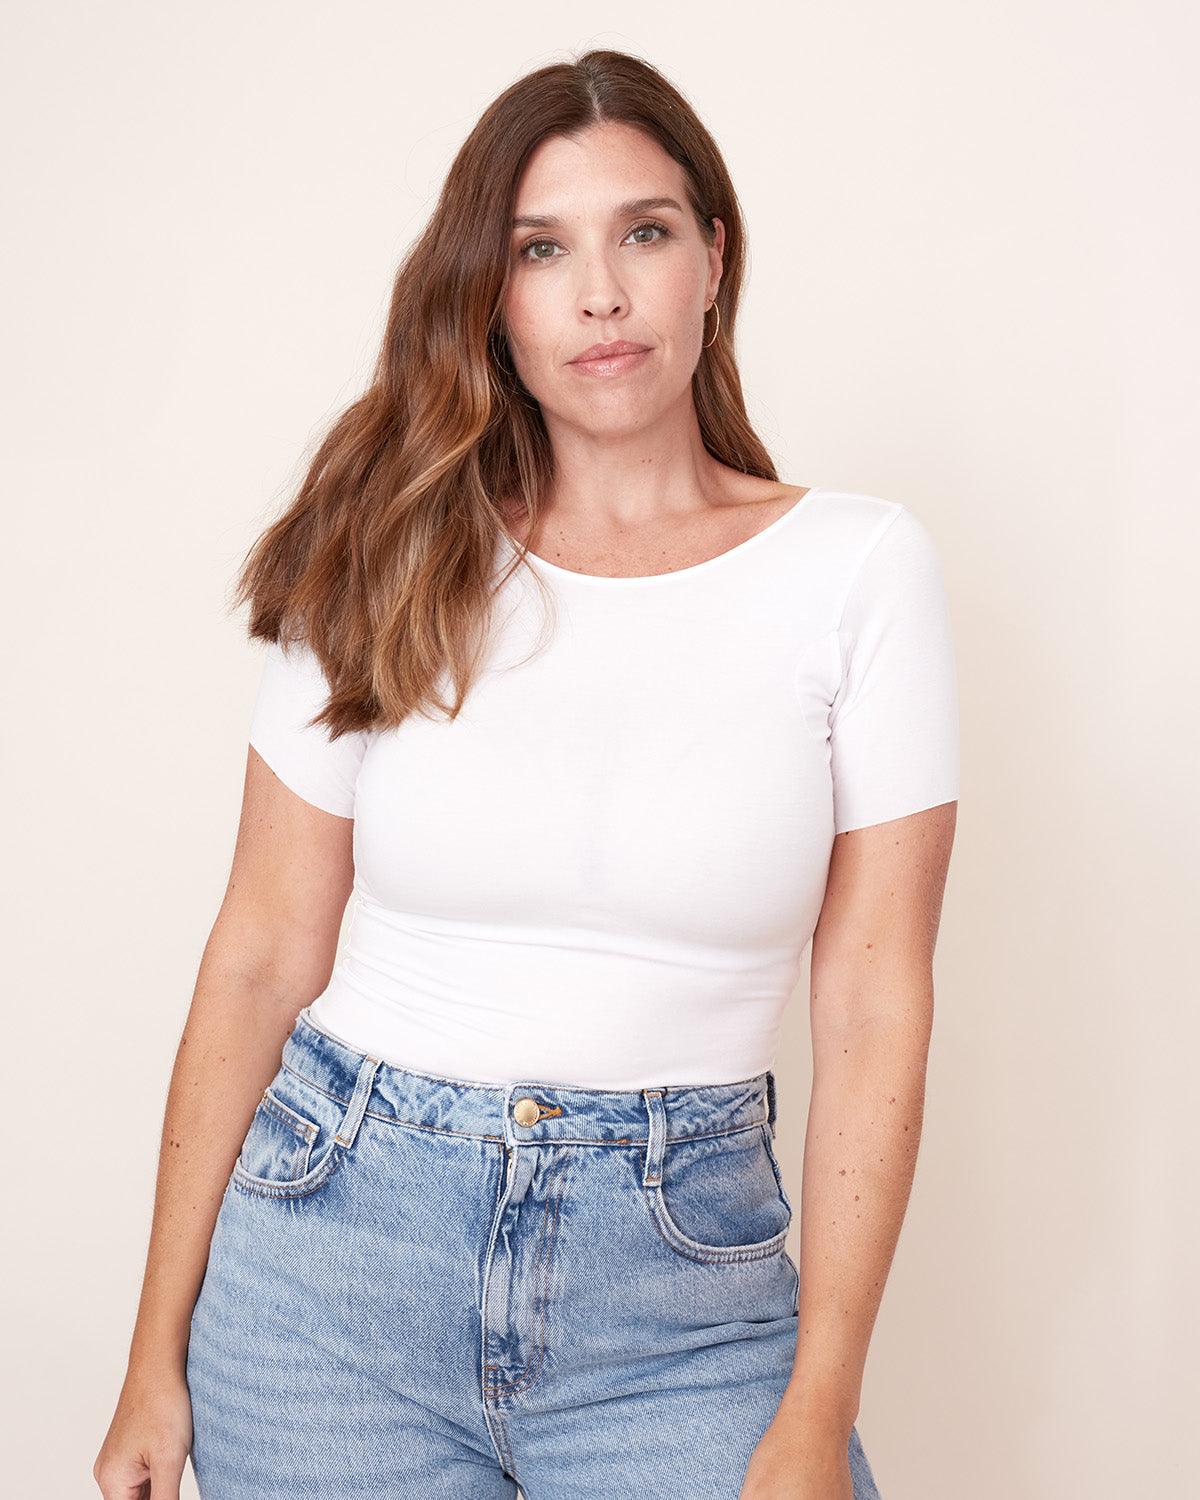 "#color_WHITE|Ashleigh is 5'11", wearing a size M